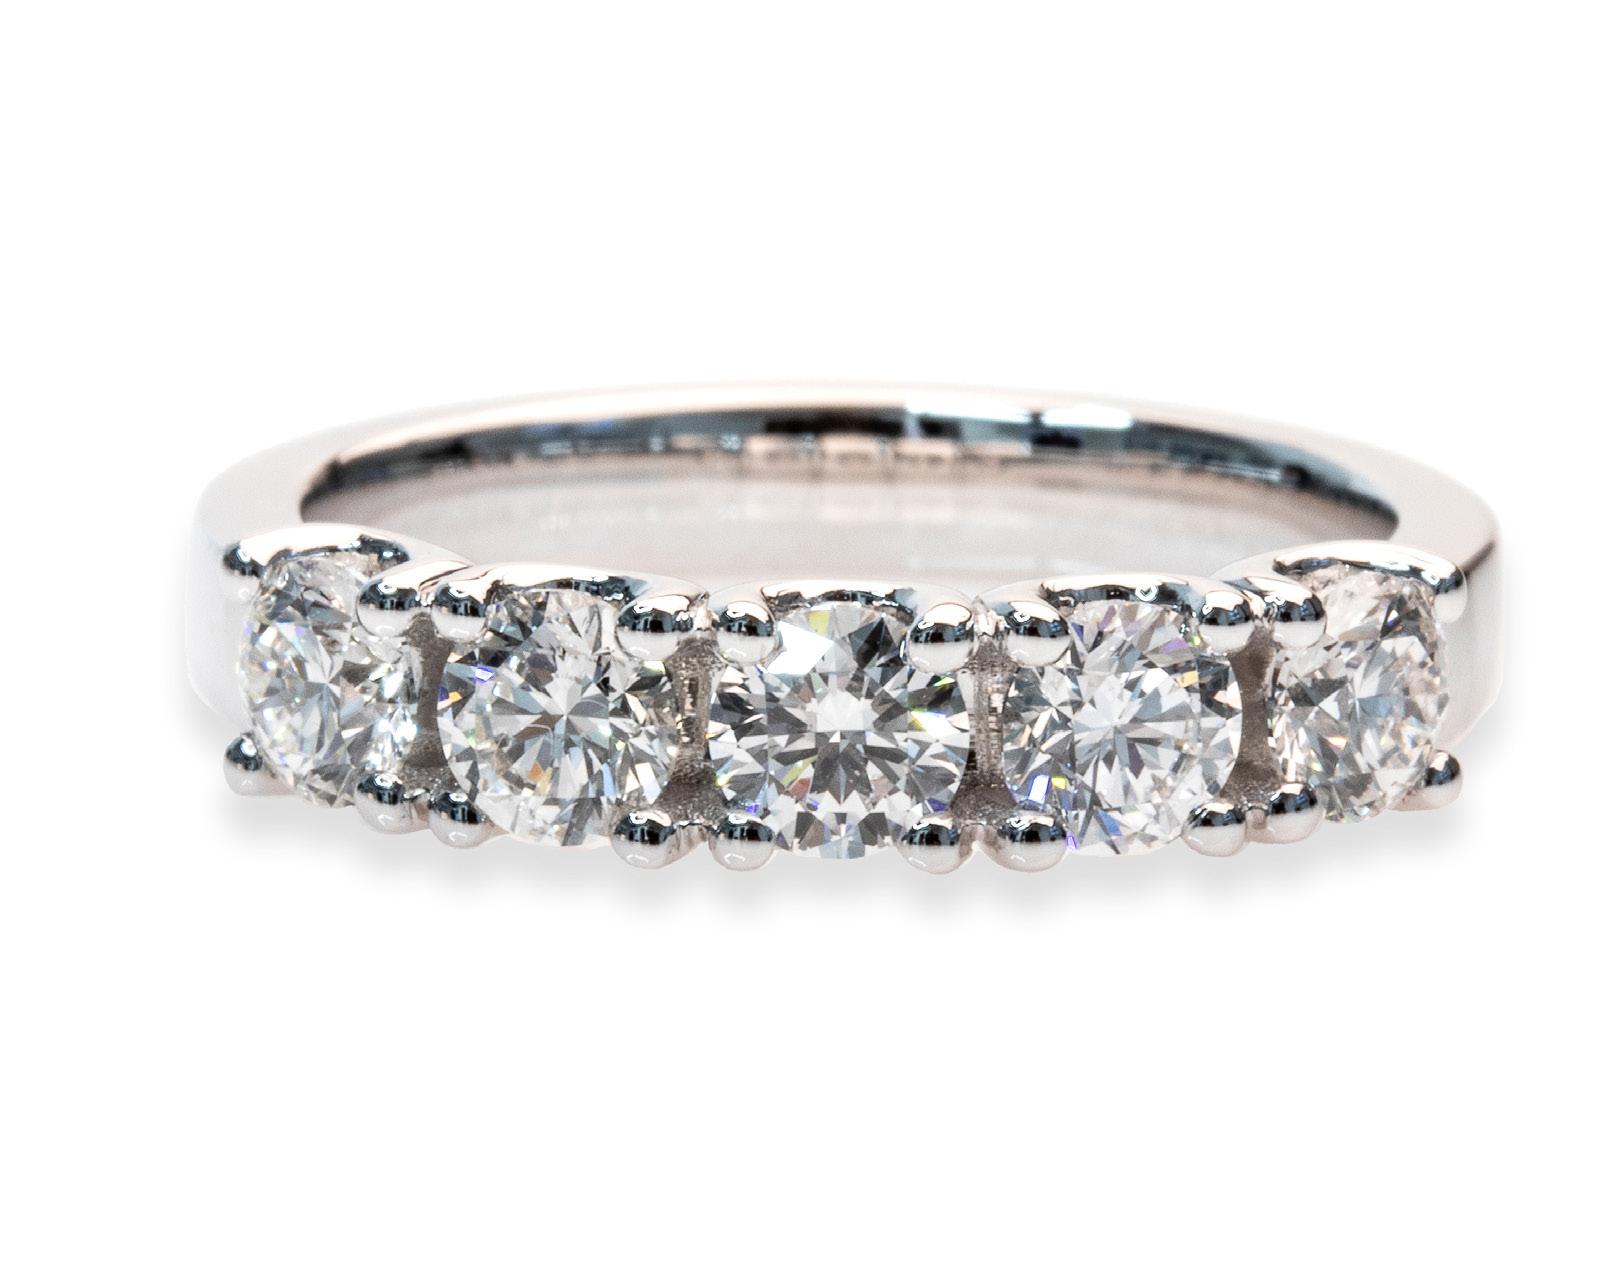 Exquisite 1.50 Carat total, E-F color, and SI clarity 18K White Gold 5 Diamonds Round Brilliant Cut Band Ring, a refined and versatile piece designed to captivate.

This stunning band ring features five brilliant round diamonds, each with an